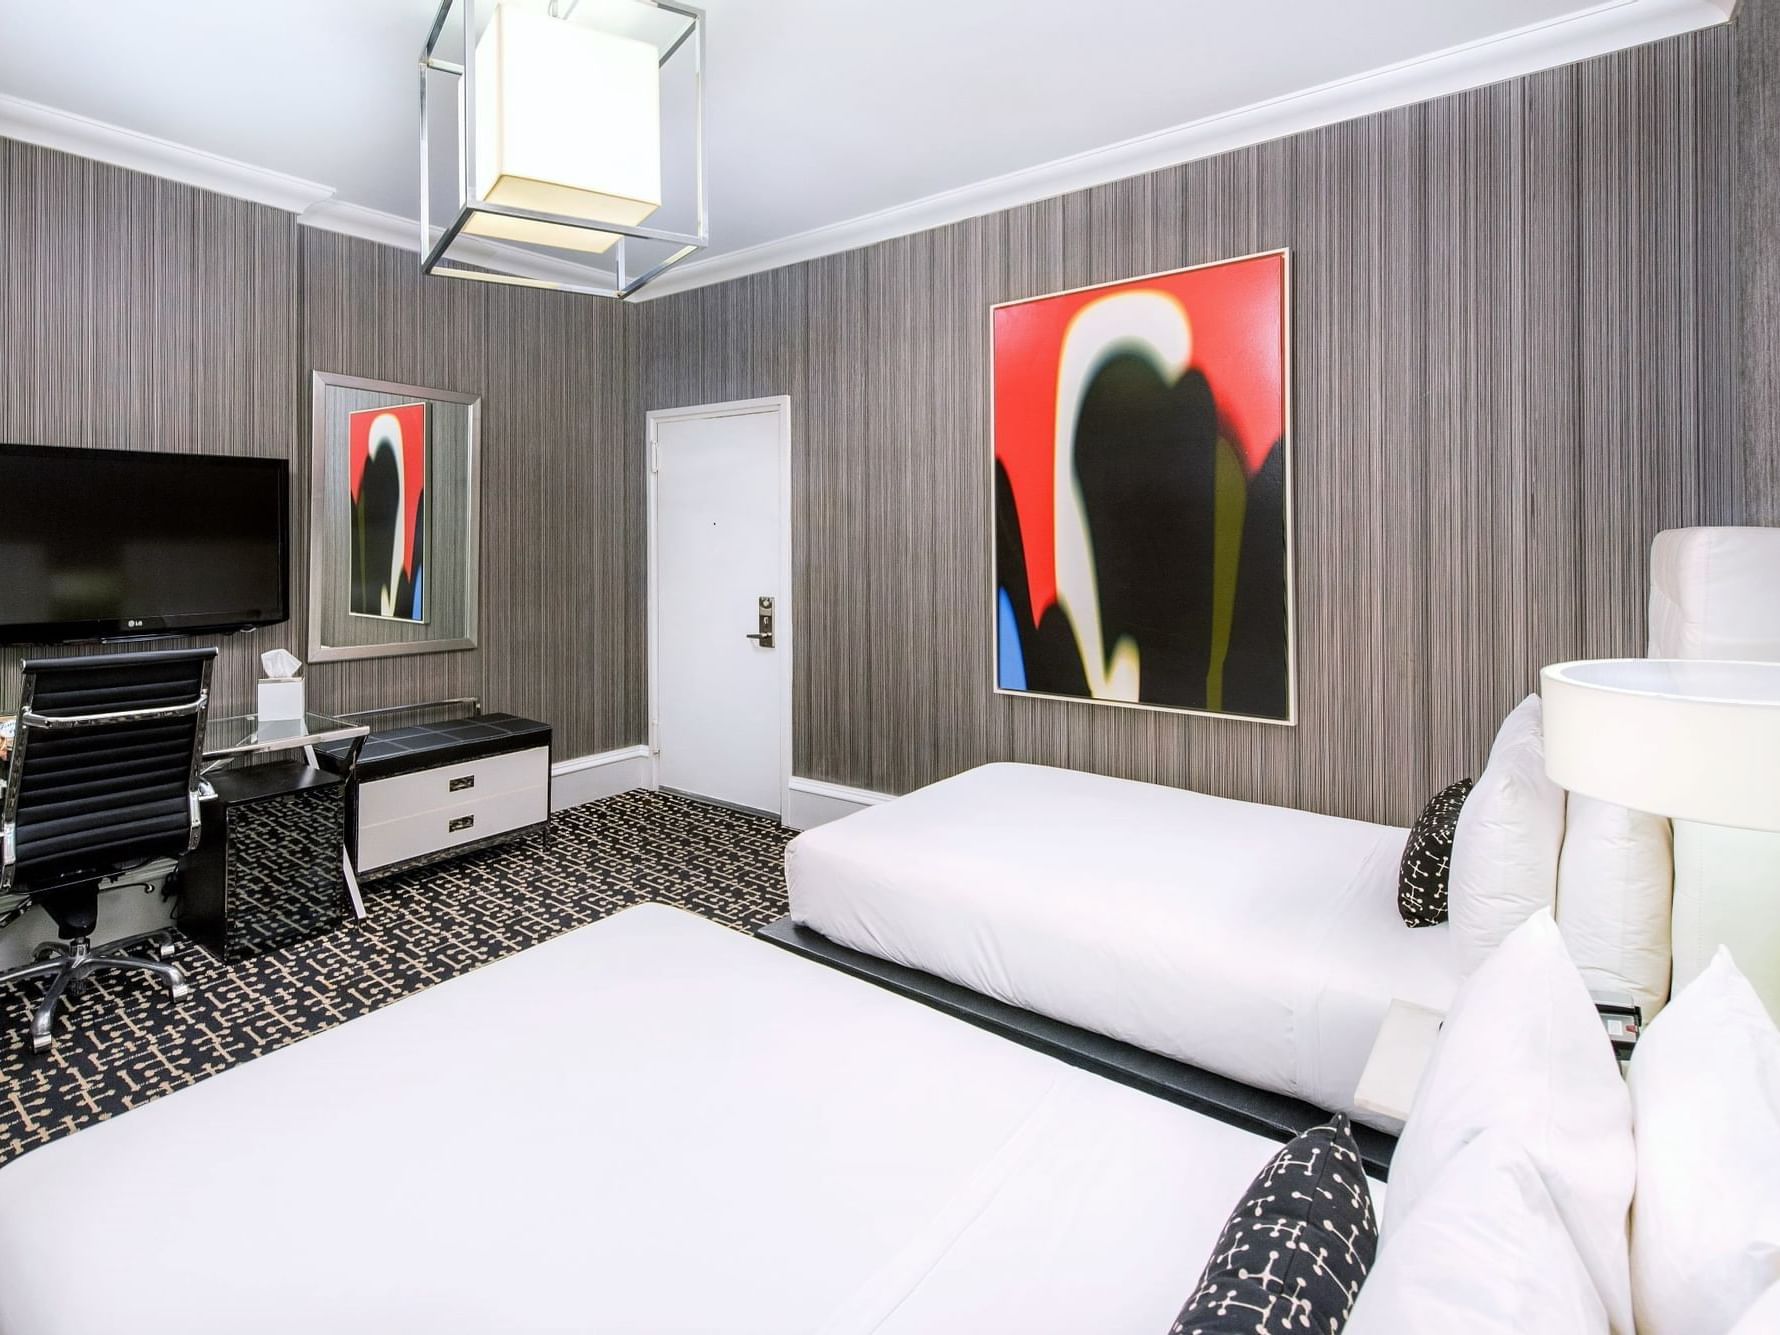 Deluxe Hotel Room with 2 Beds - Moderne Hotel New York City